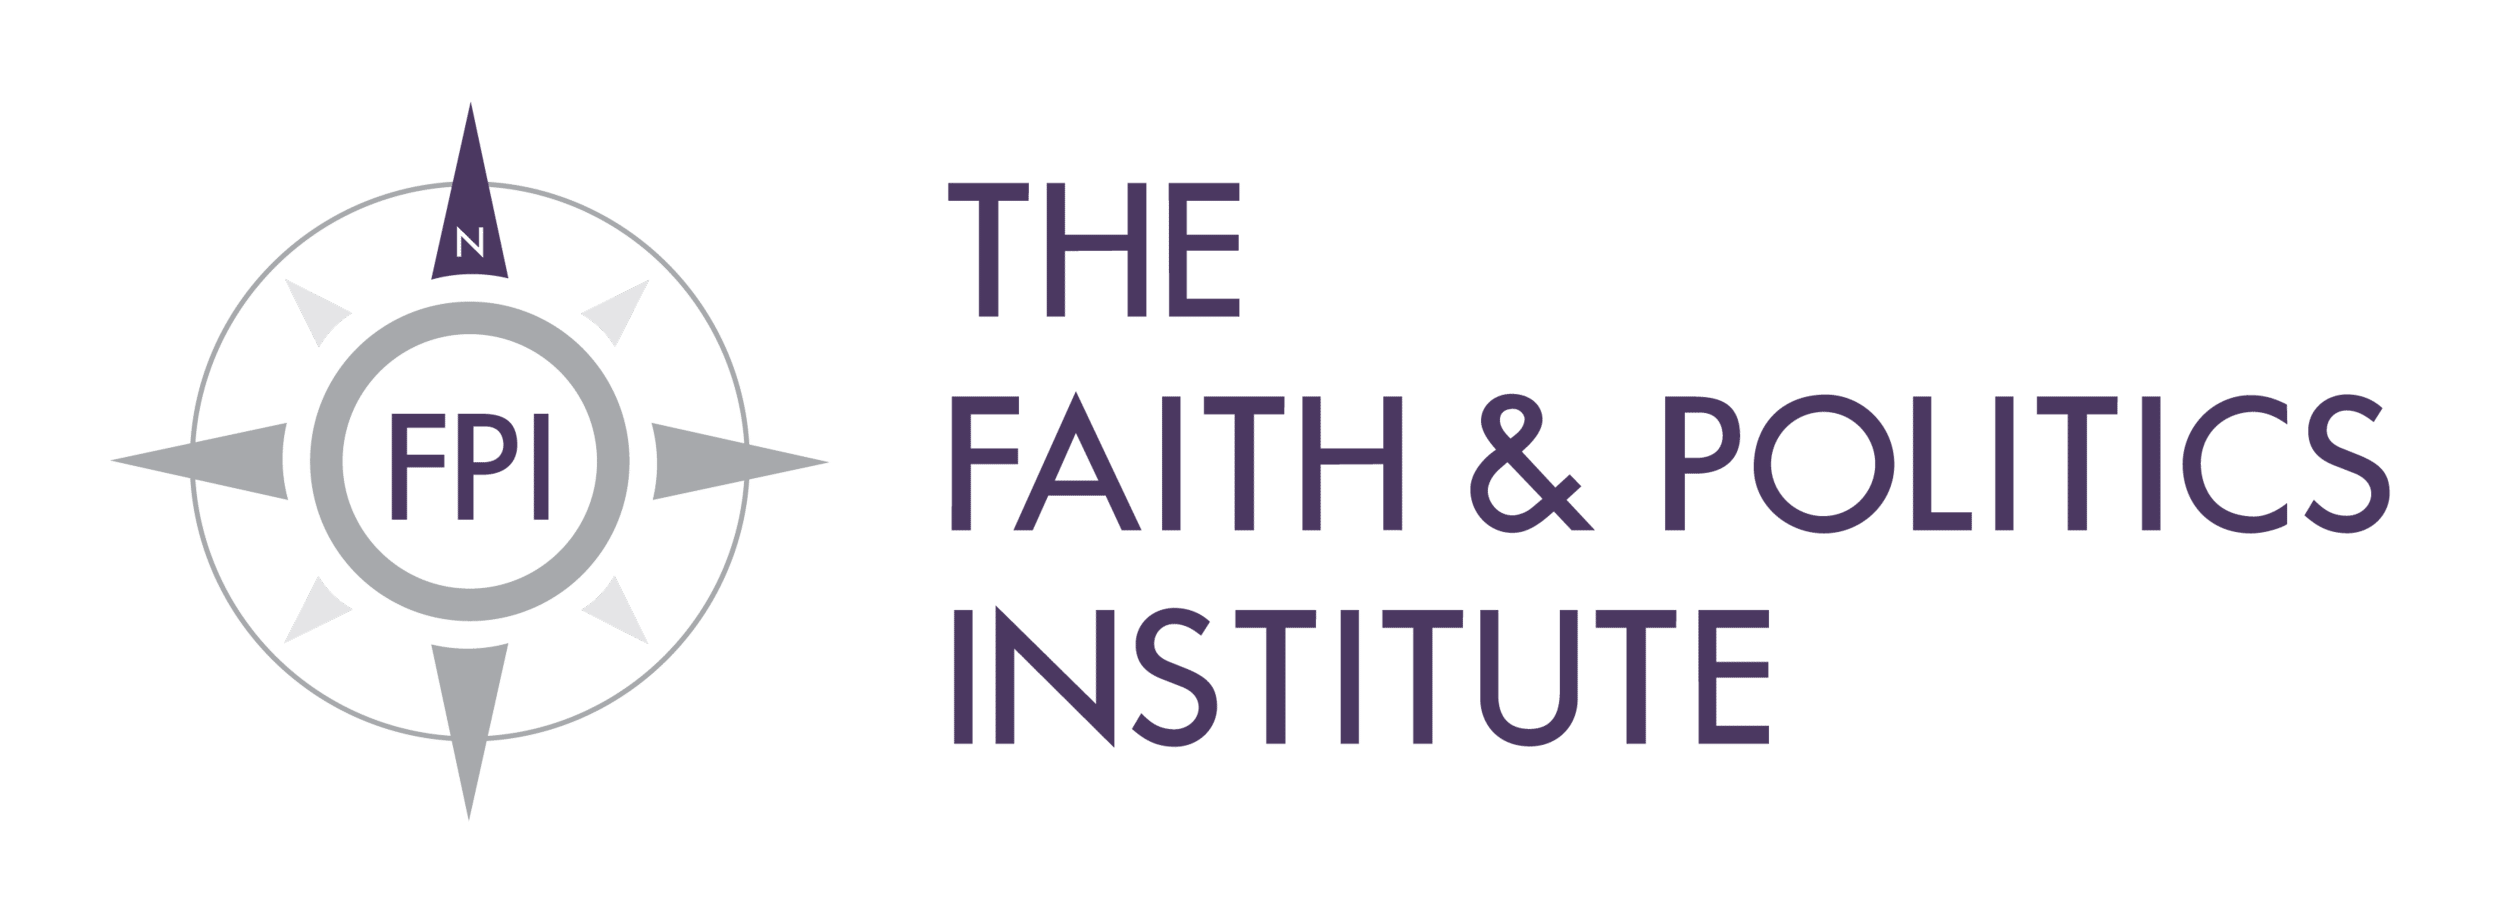 Robert Wilson-Black Selected as New President & CEO at The Faith & Politics Institute